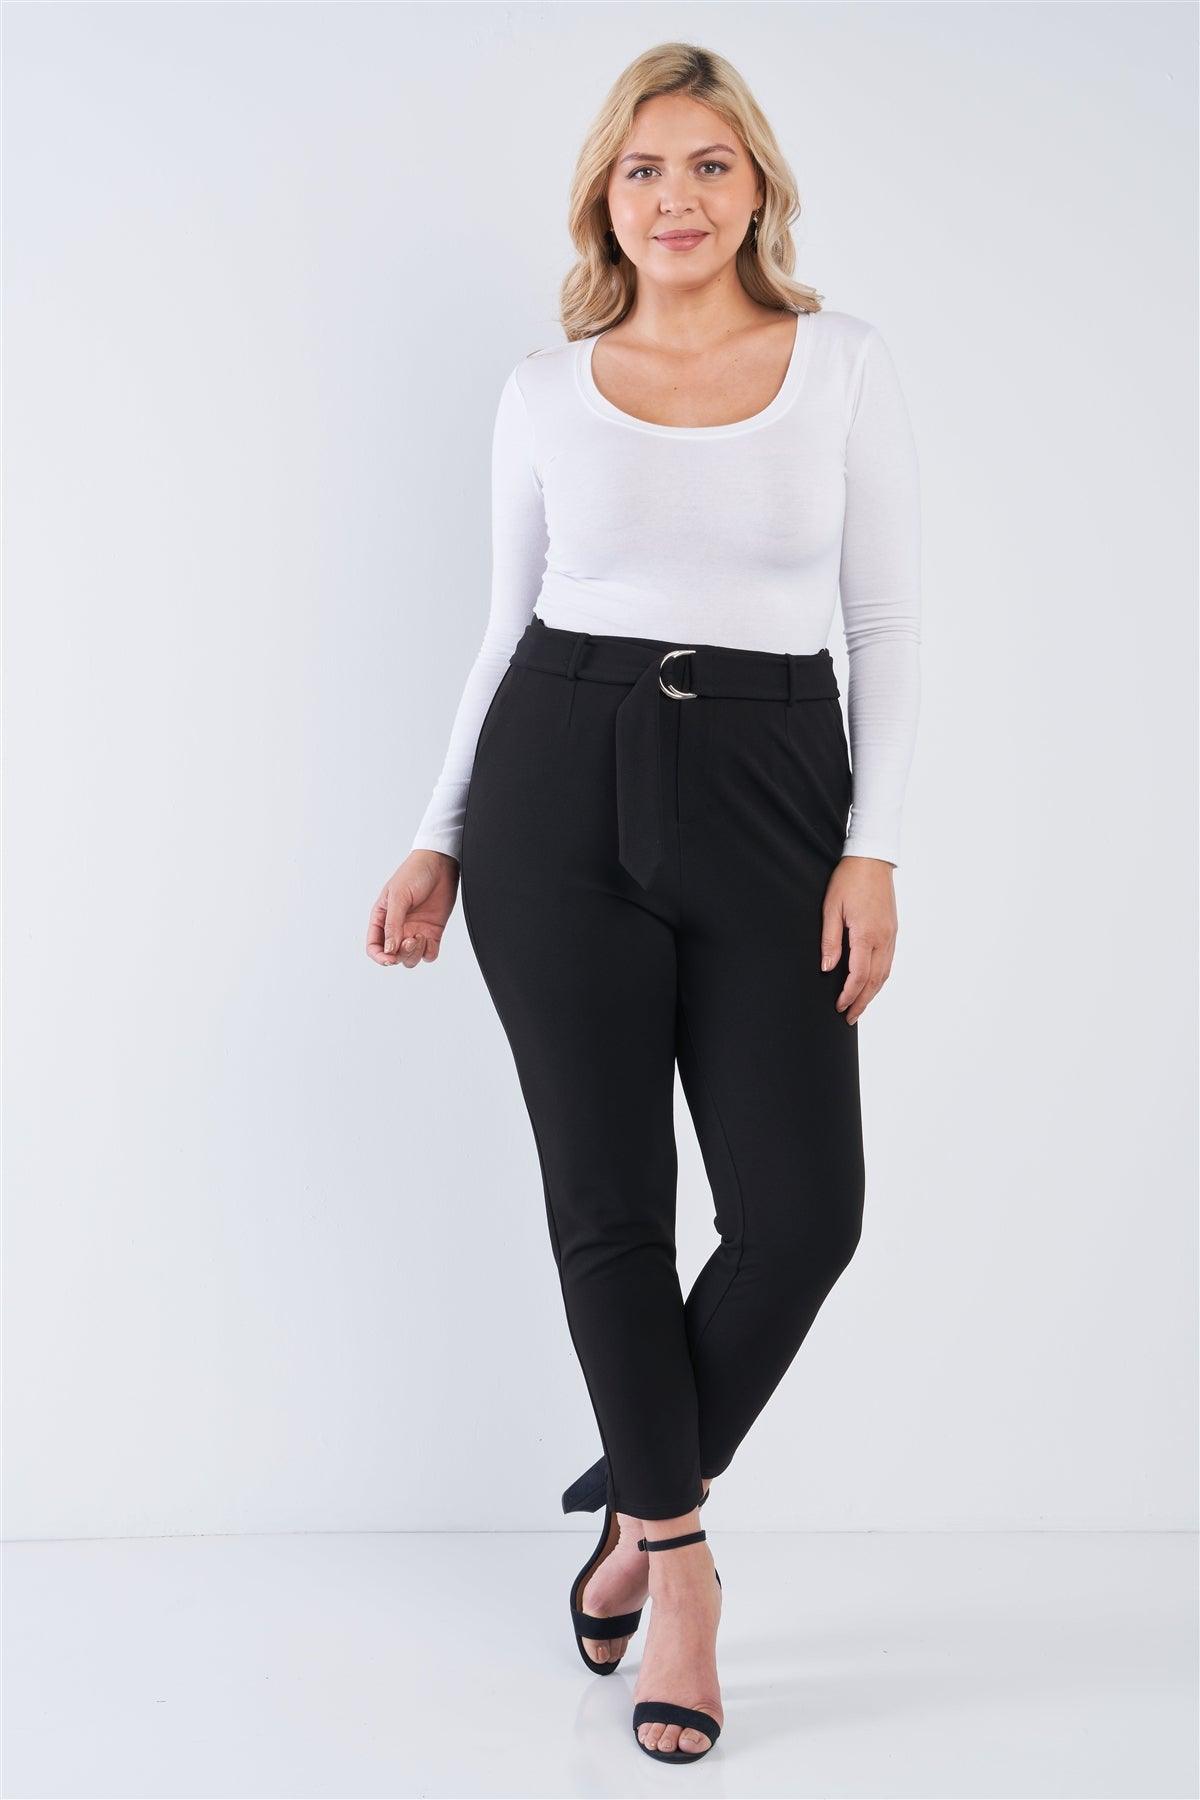 Junior Plus Size Black High Waisted Ankle Length Pants /2-2-2